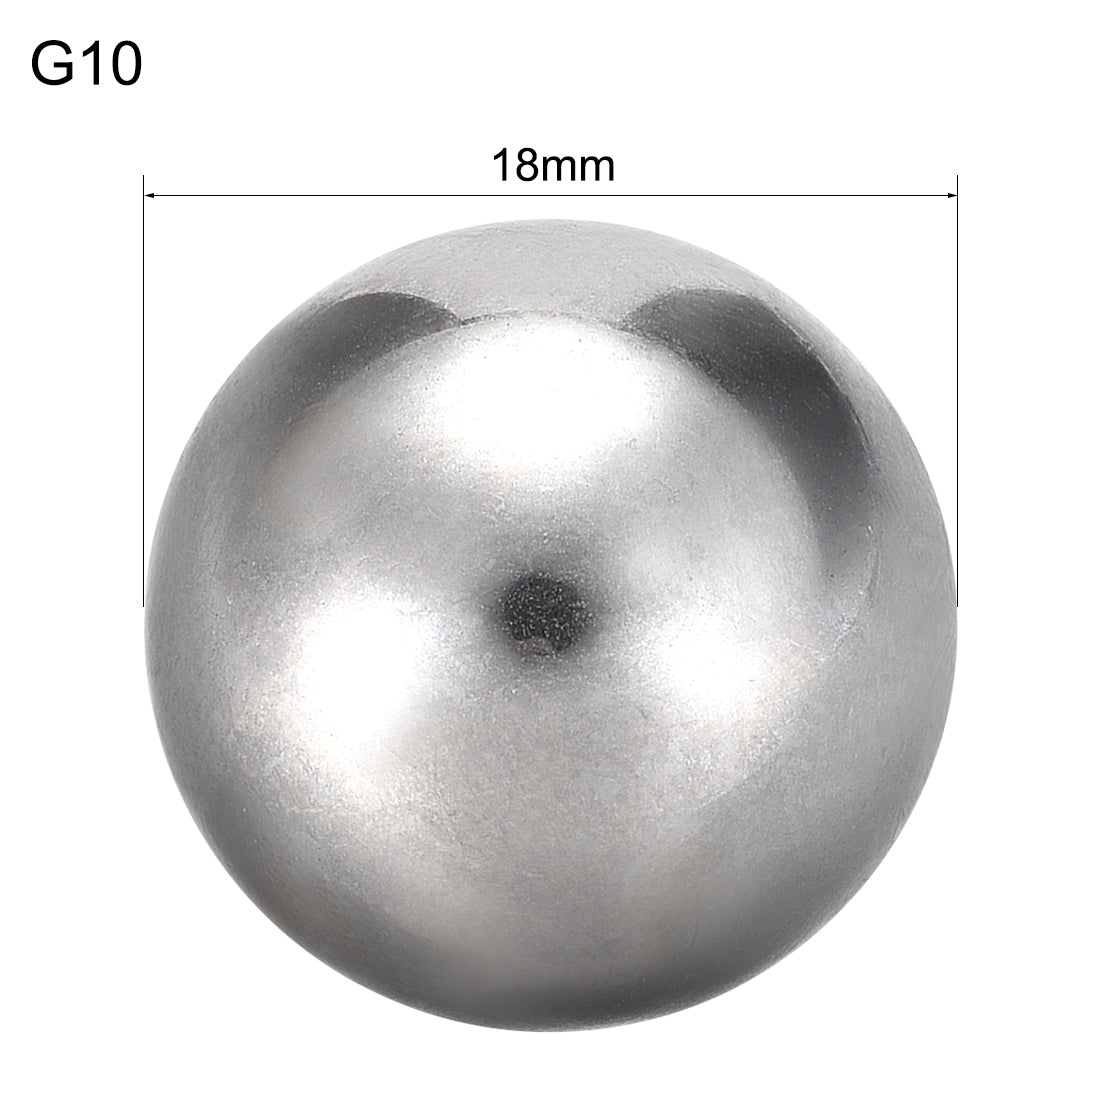 uxcell Uxcell Precision Balls 11mm Solid Chrome Steel G10 for Ball Bearing Wheel 10pcs